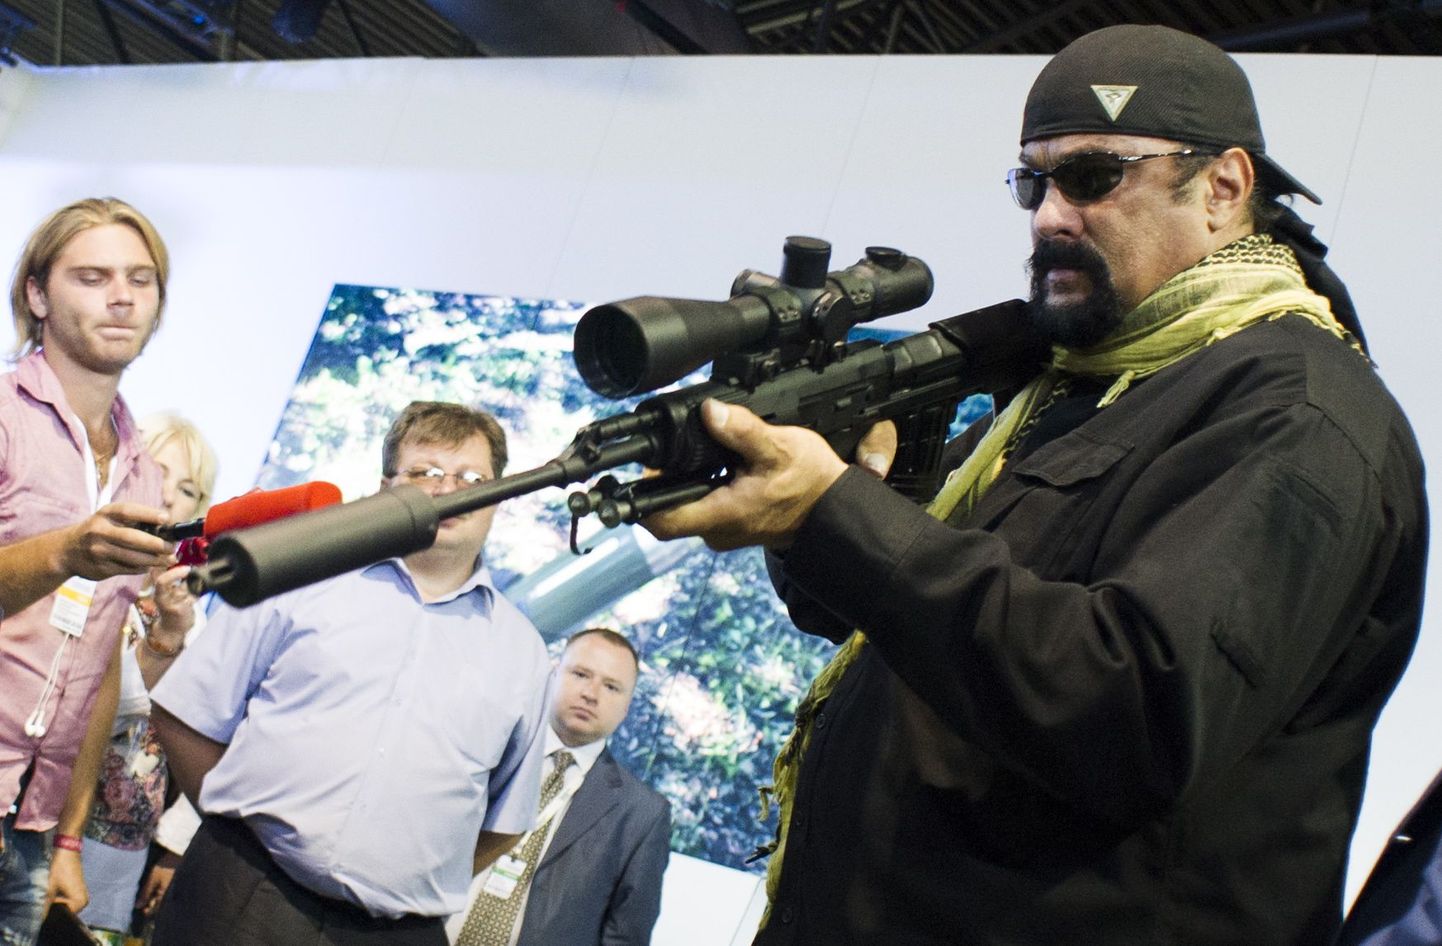 ITAR-TASS: MOSCOW REGION, RUSSIA. AUGUST 14, 2014. American actor Steven Seagal (R) testing a rifle at the 2nd International Exhibition "Oboronexpo-2014" as part of the International Forum "Engineering Technologies 2014" in Zhukovsky, Moscow Region. (Photo ITAR-TASS/ Sergei Bobylev)